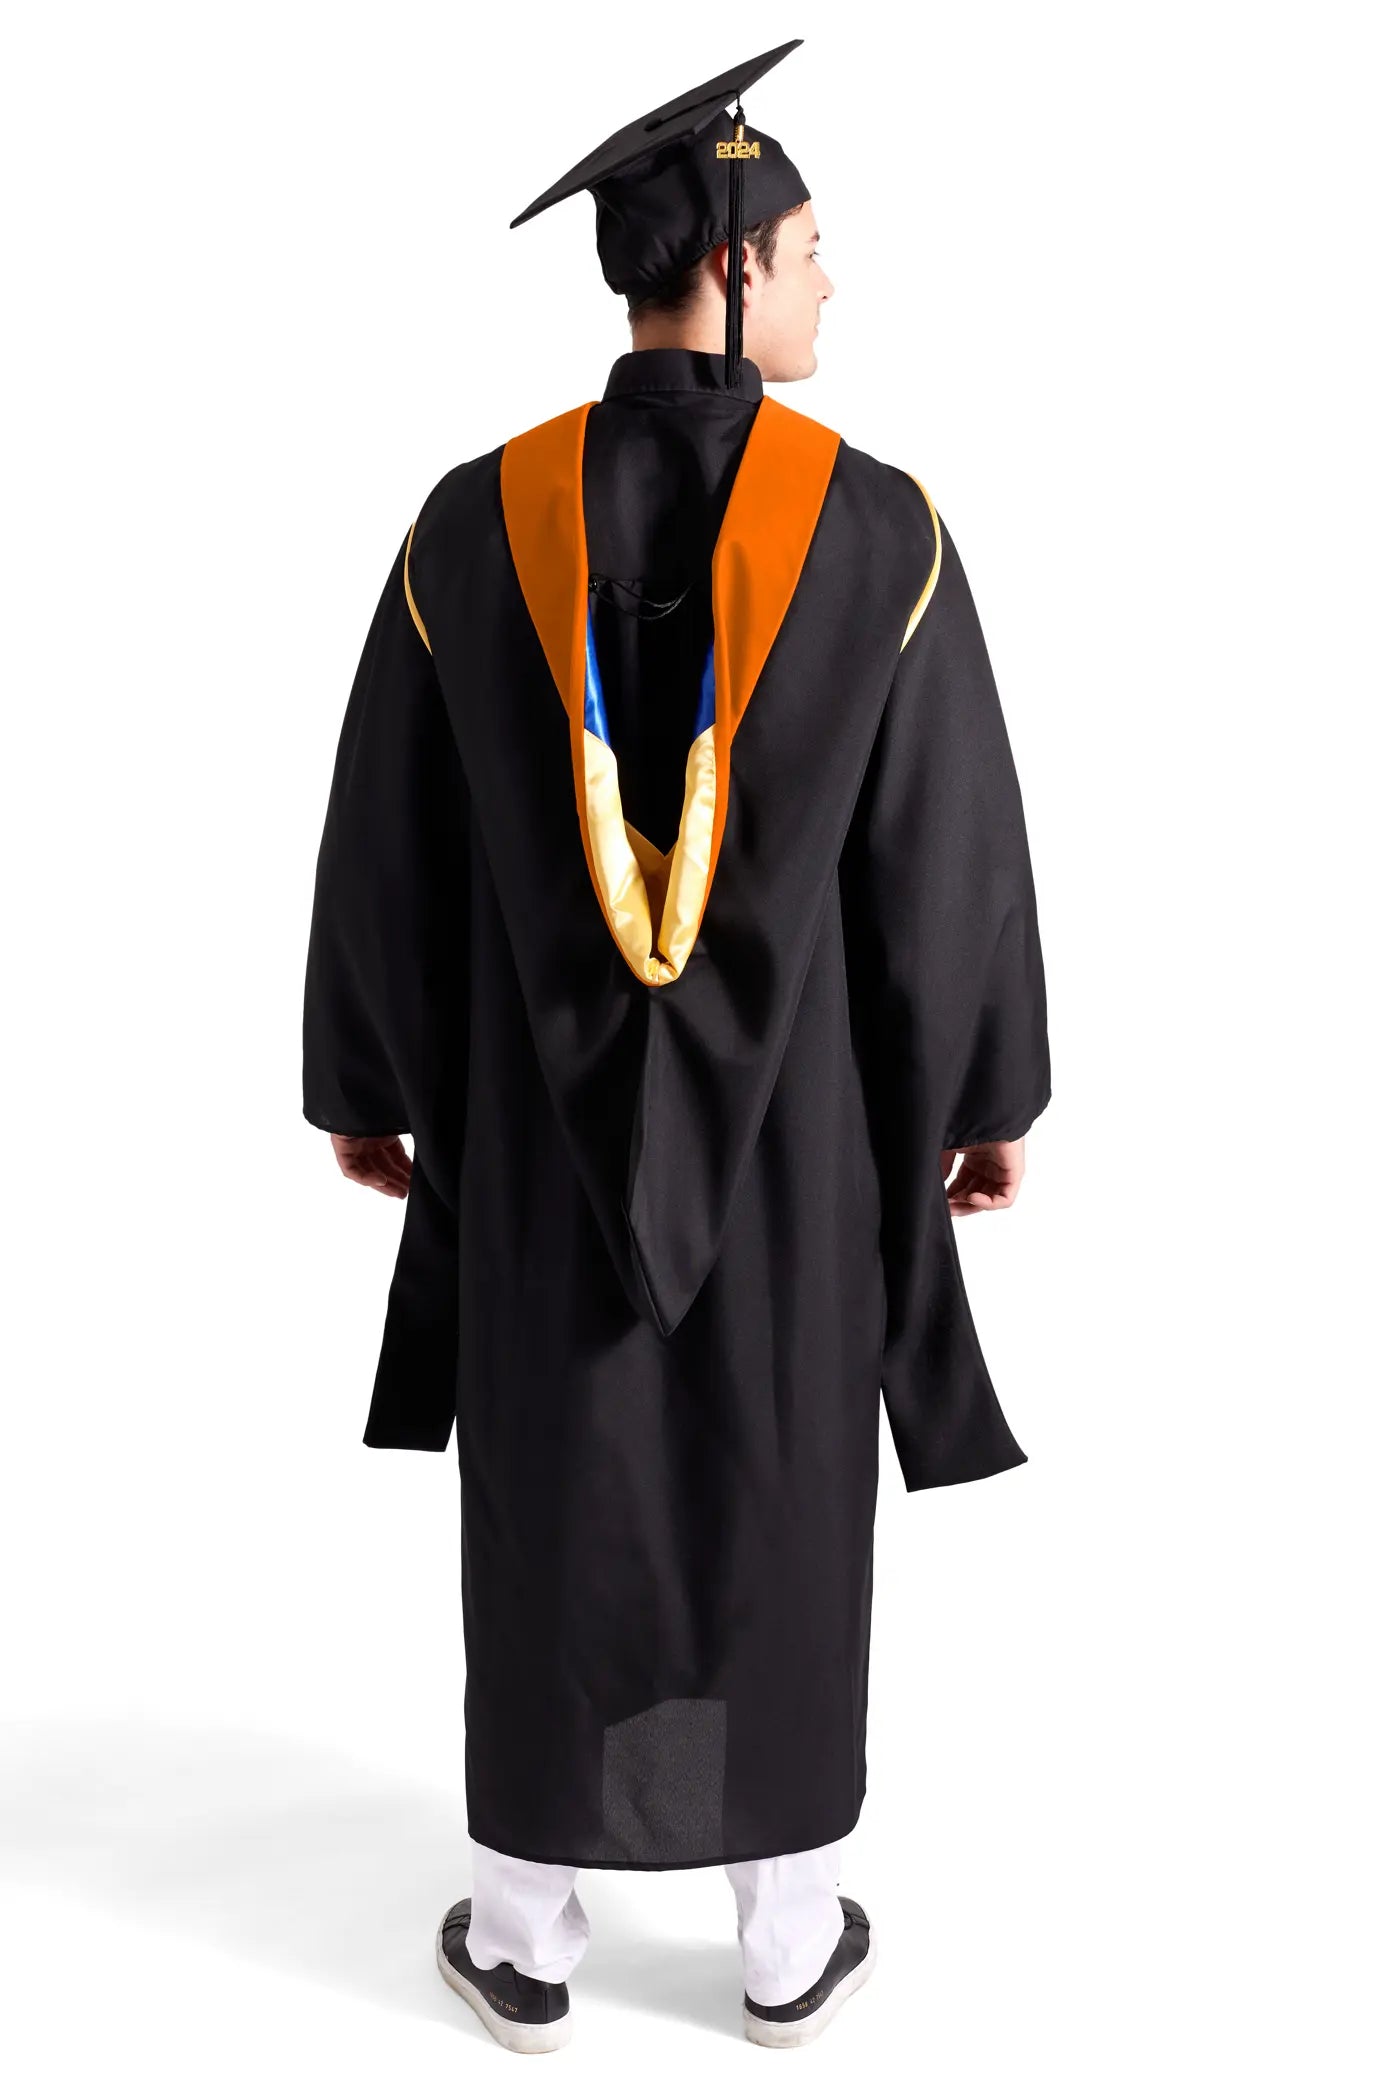 HAPPY TASSEL | UC Riverside Master's Regalia Set, include master's gown with pockets, mortarboard cap, orange hood, and tassel with year charm. | Engineering Degree